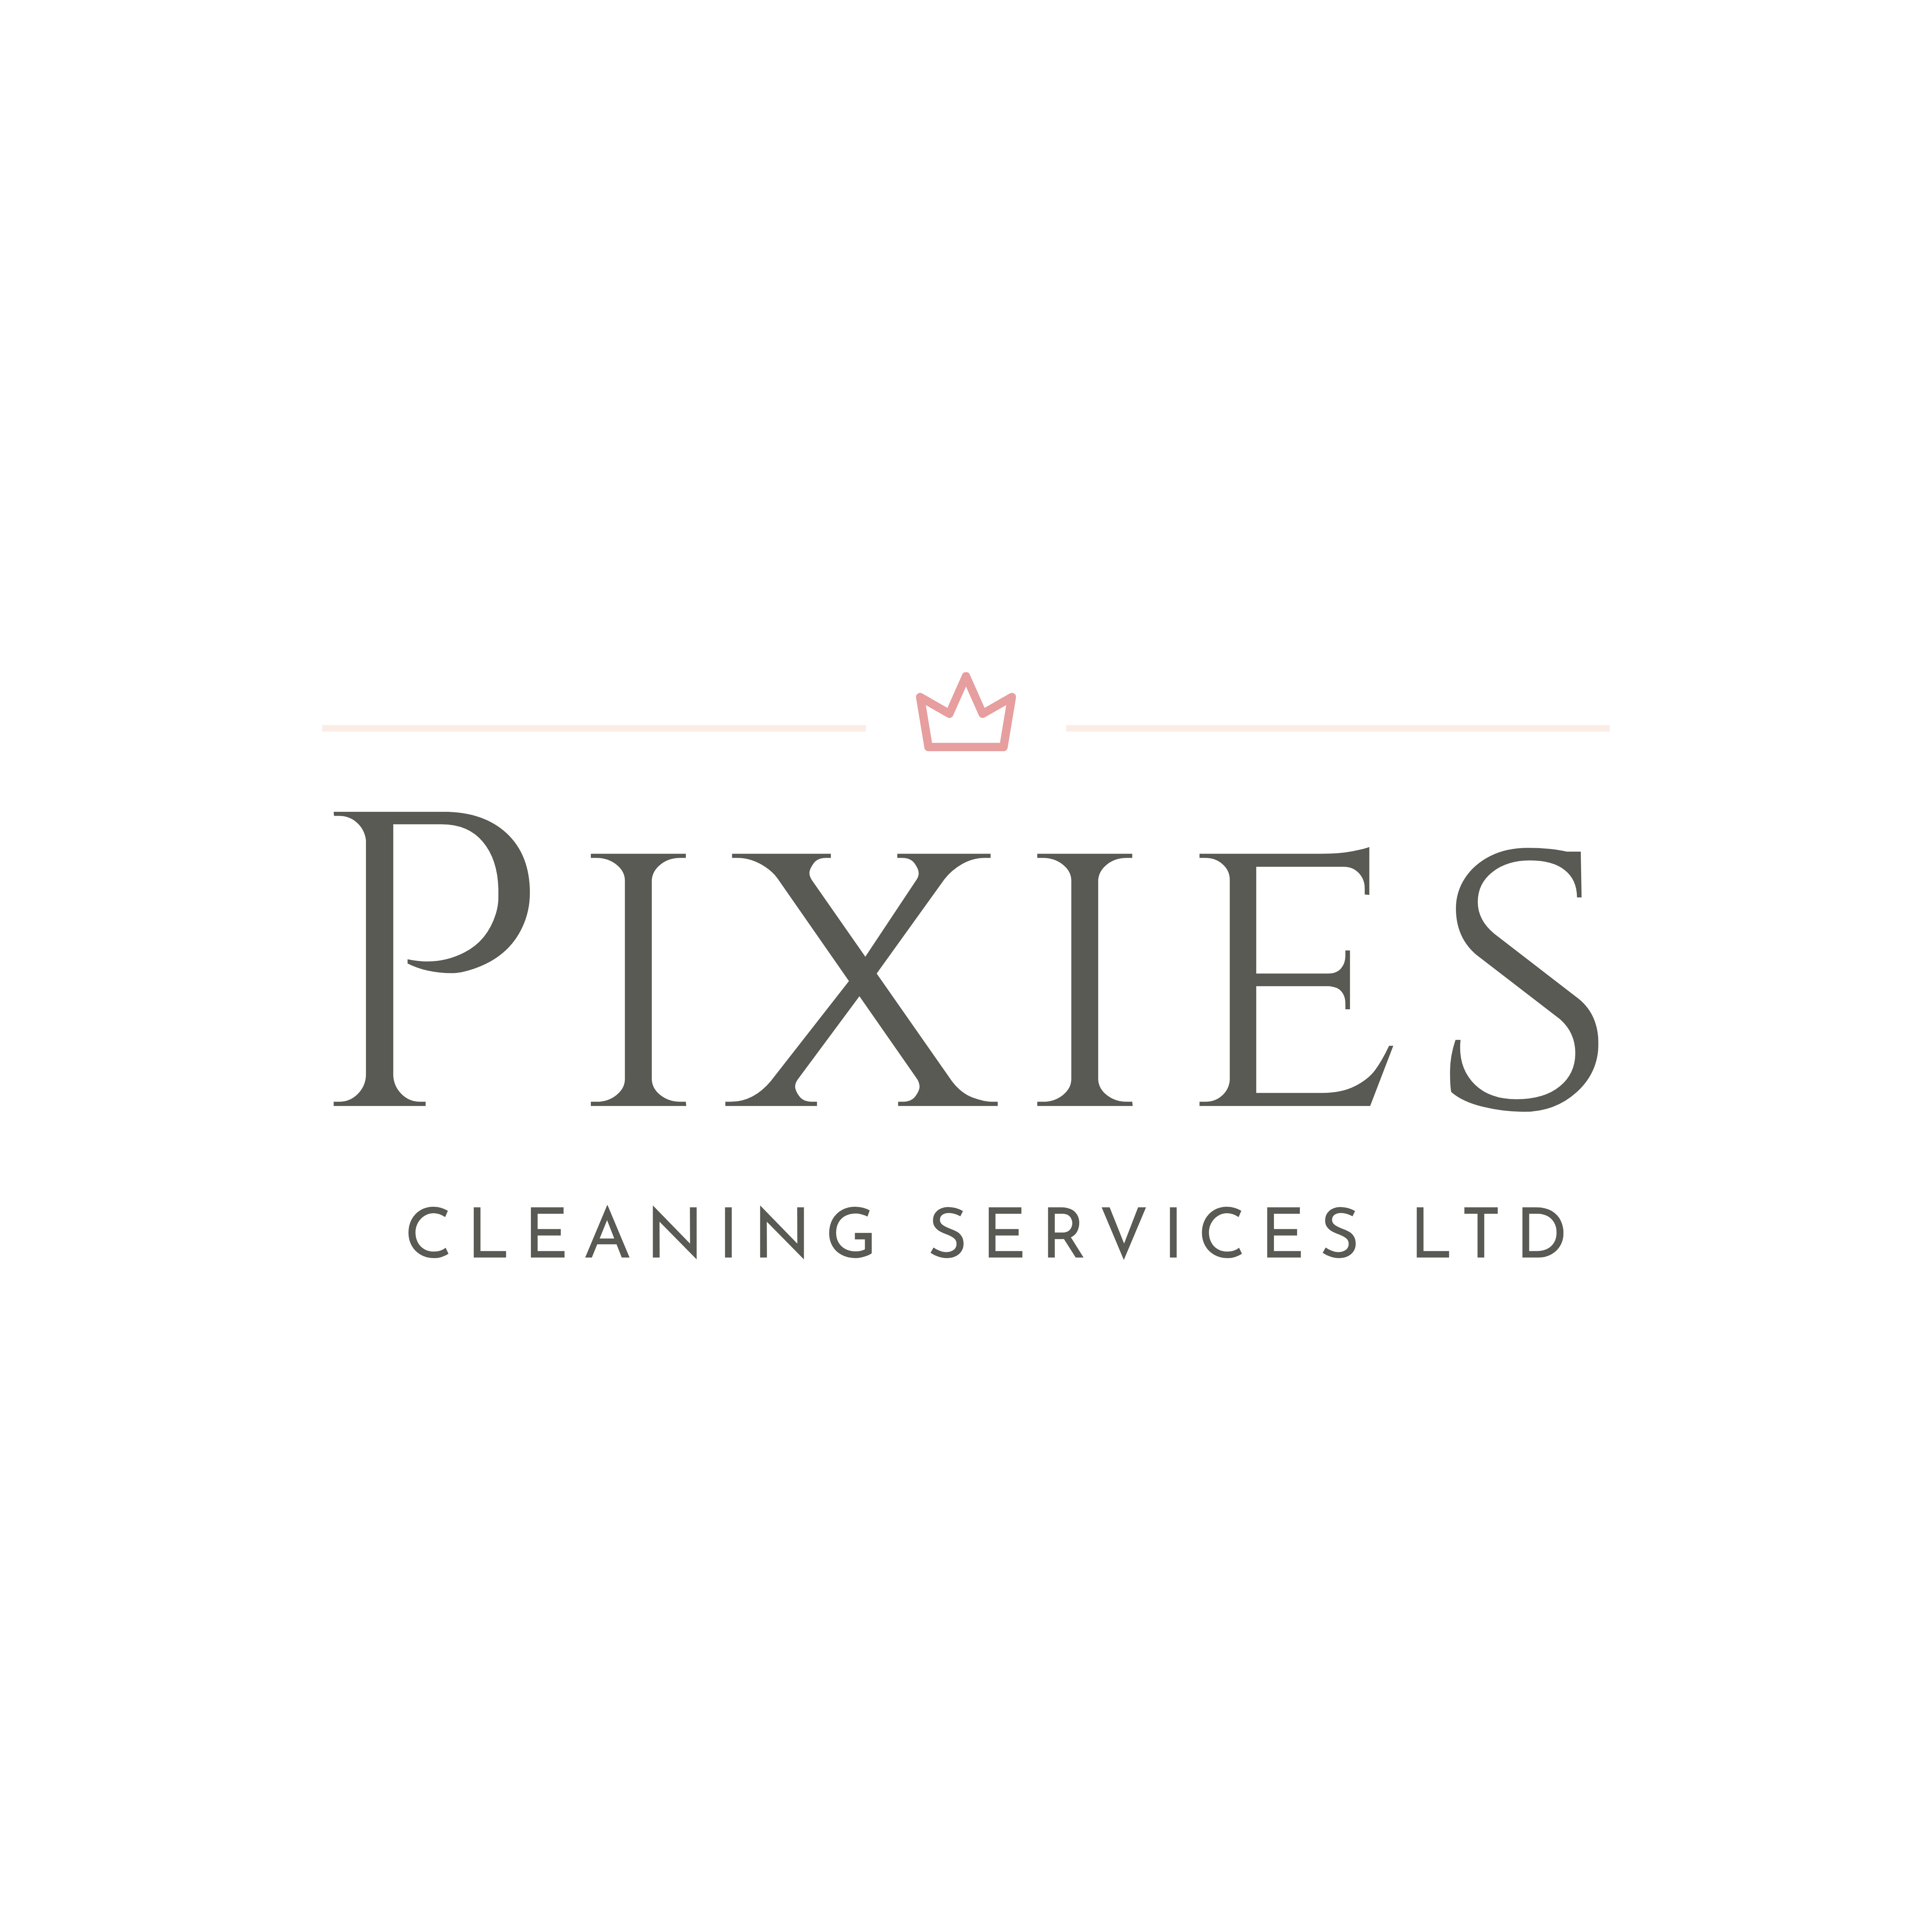 Pixies Cleaning Services